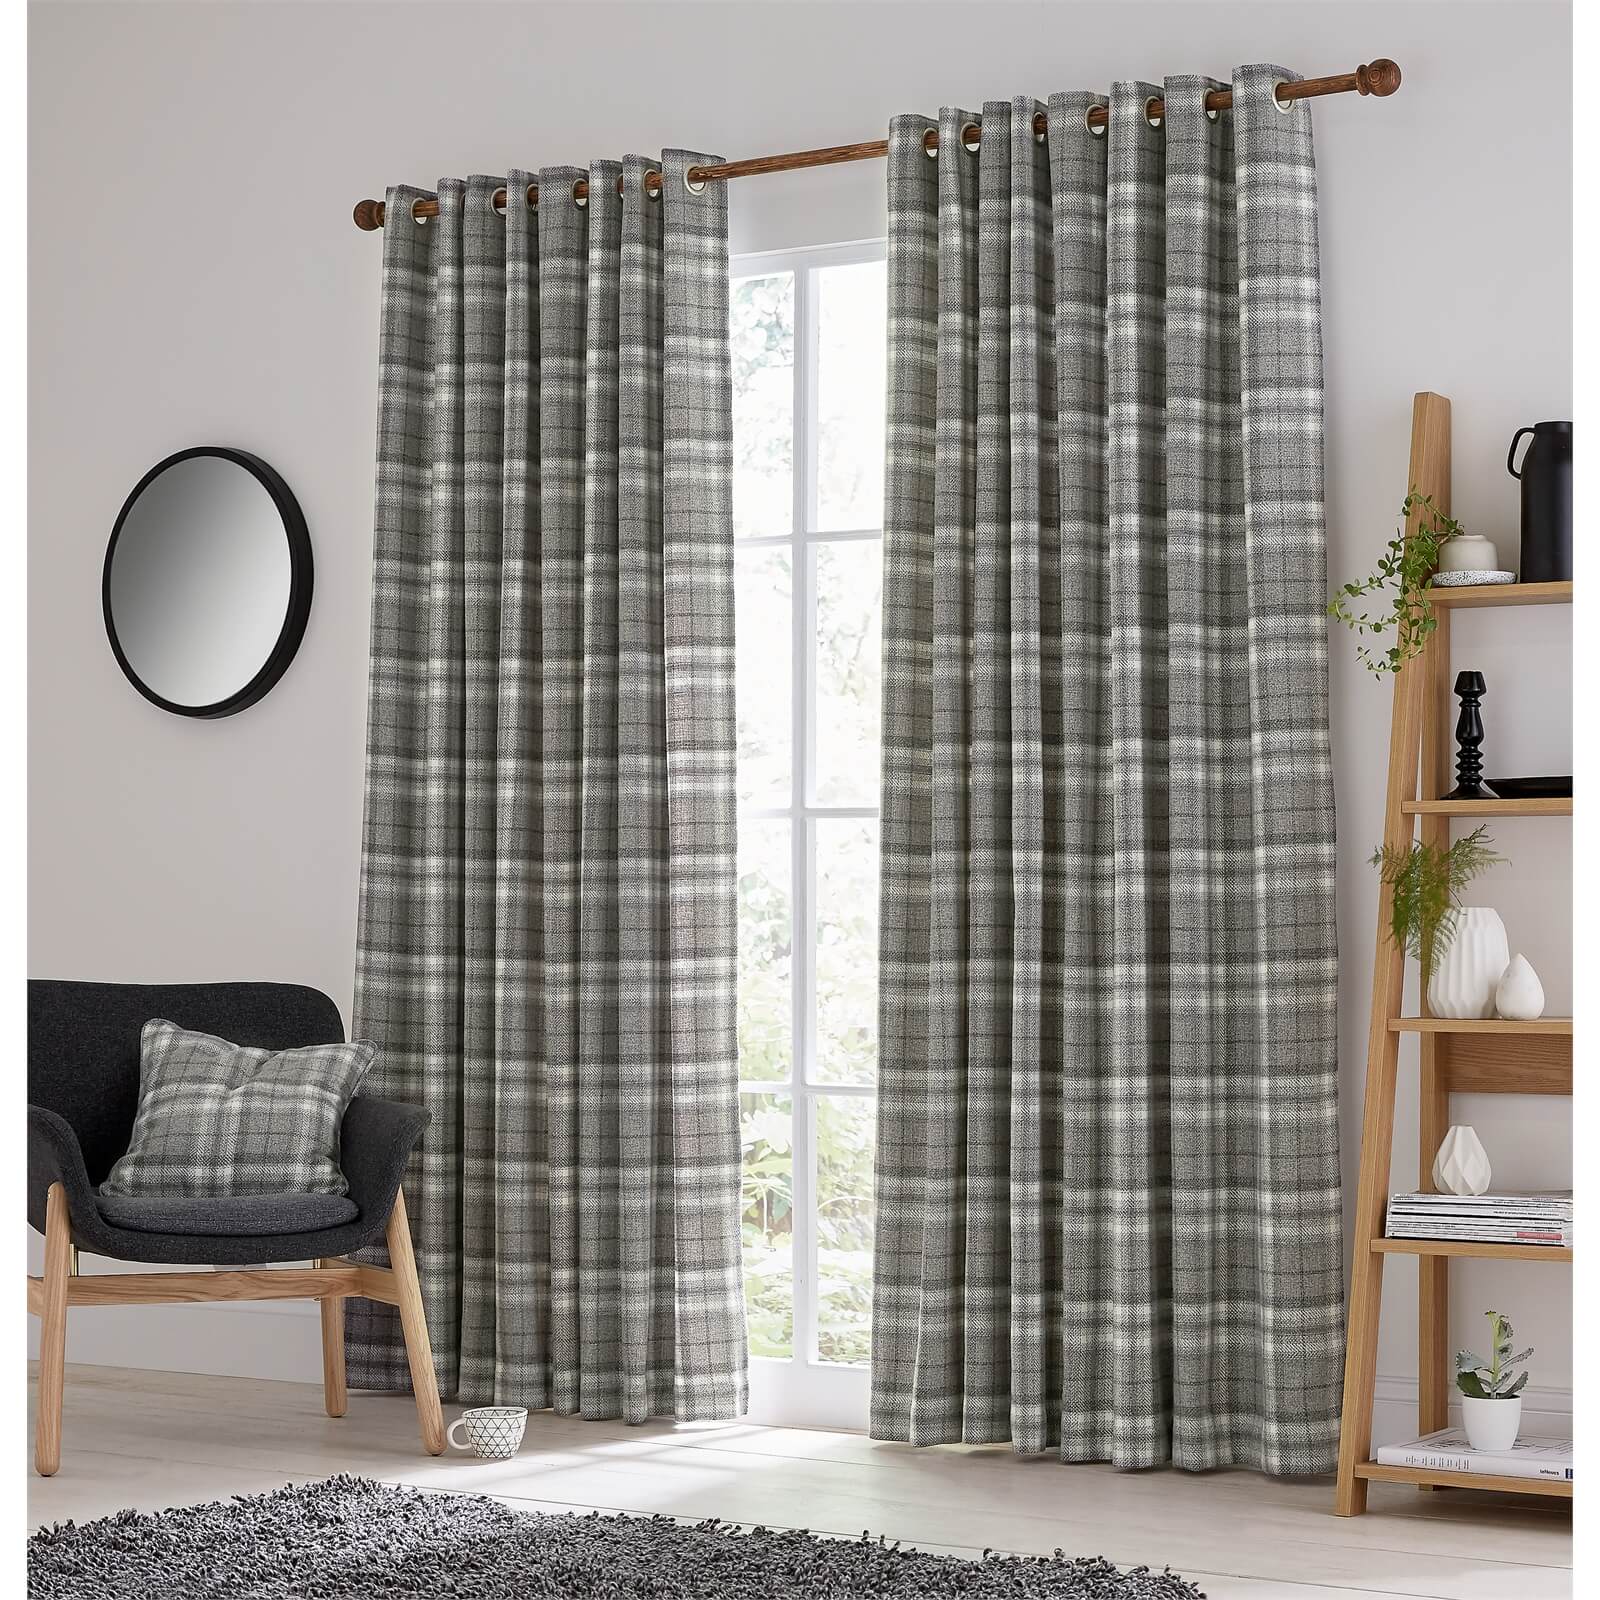 Helena Springfield Harriet Lined Curtains 90 x 72 - Charcoal